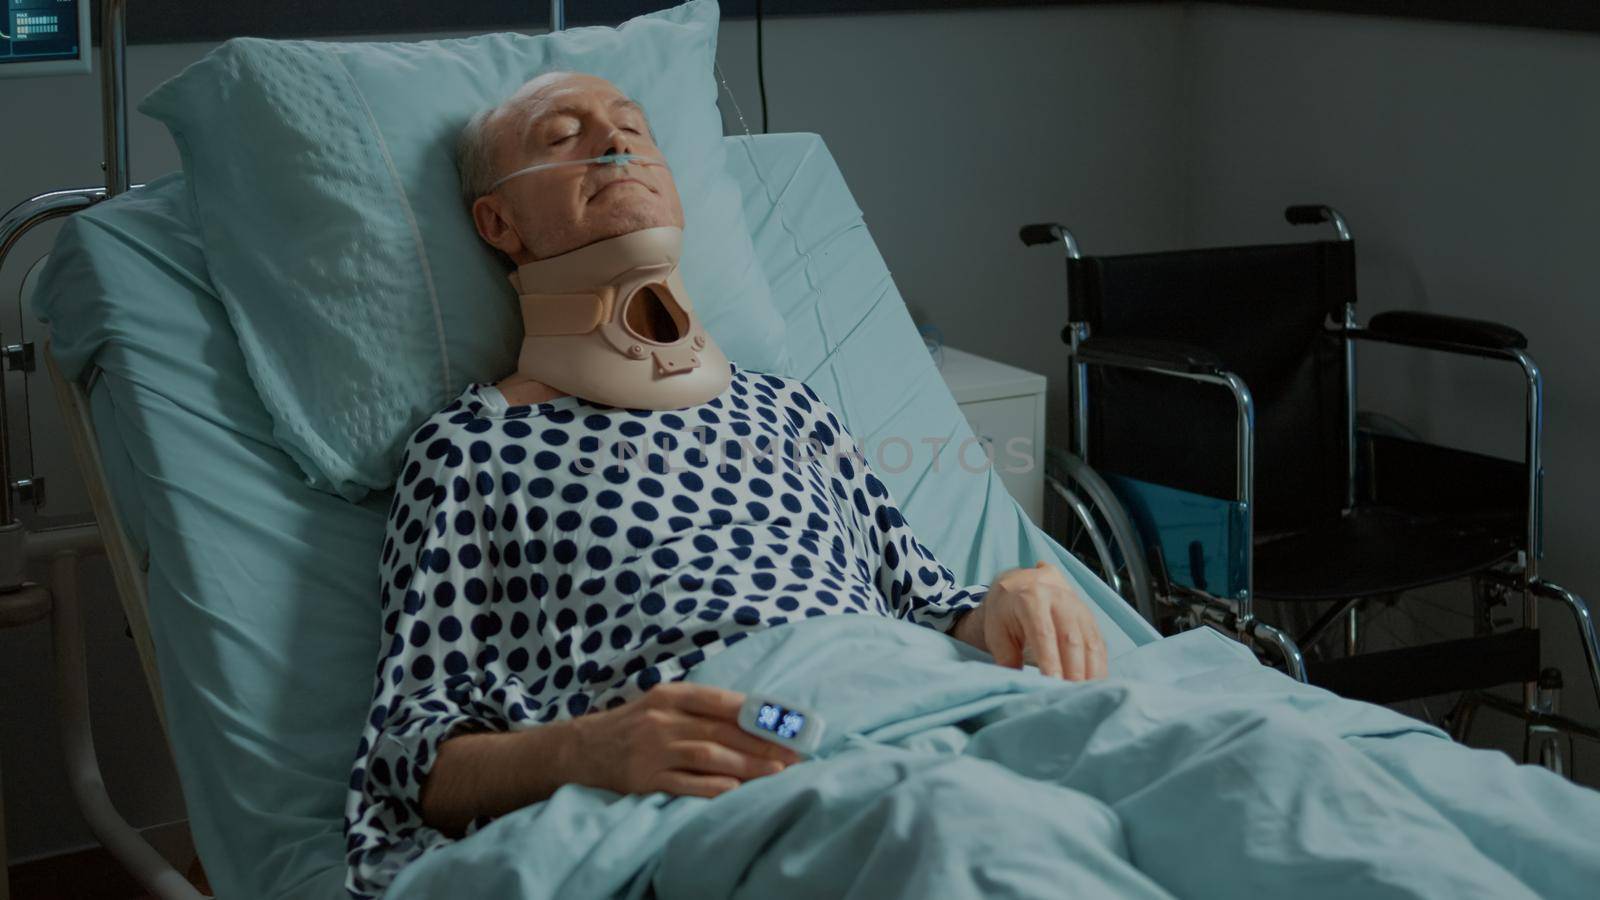 Elder patient sitting in hospital ward bed with cervical collar by DCStudio